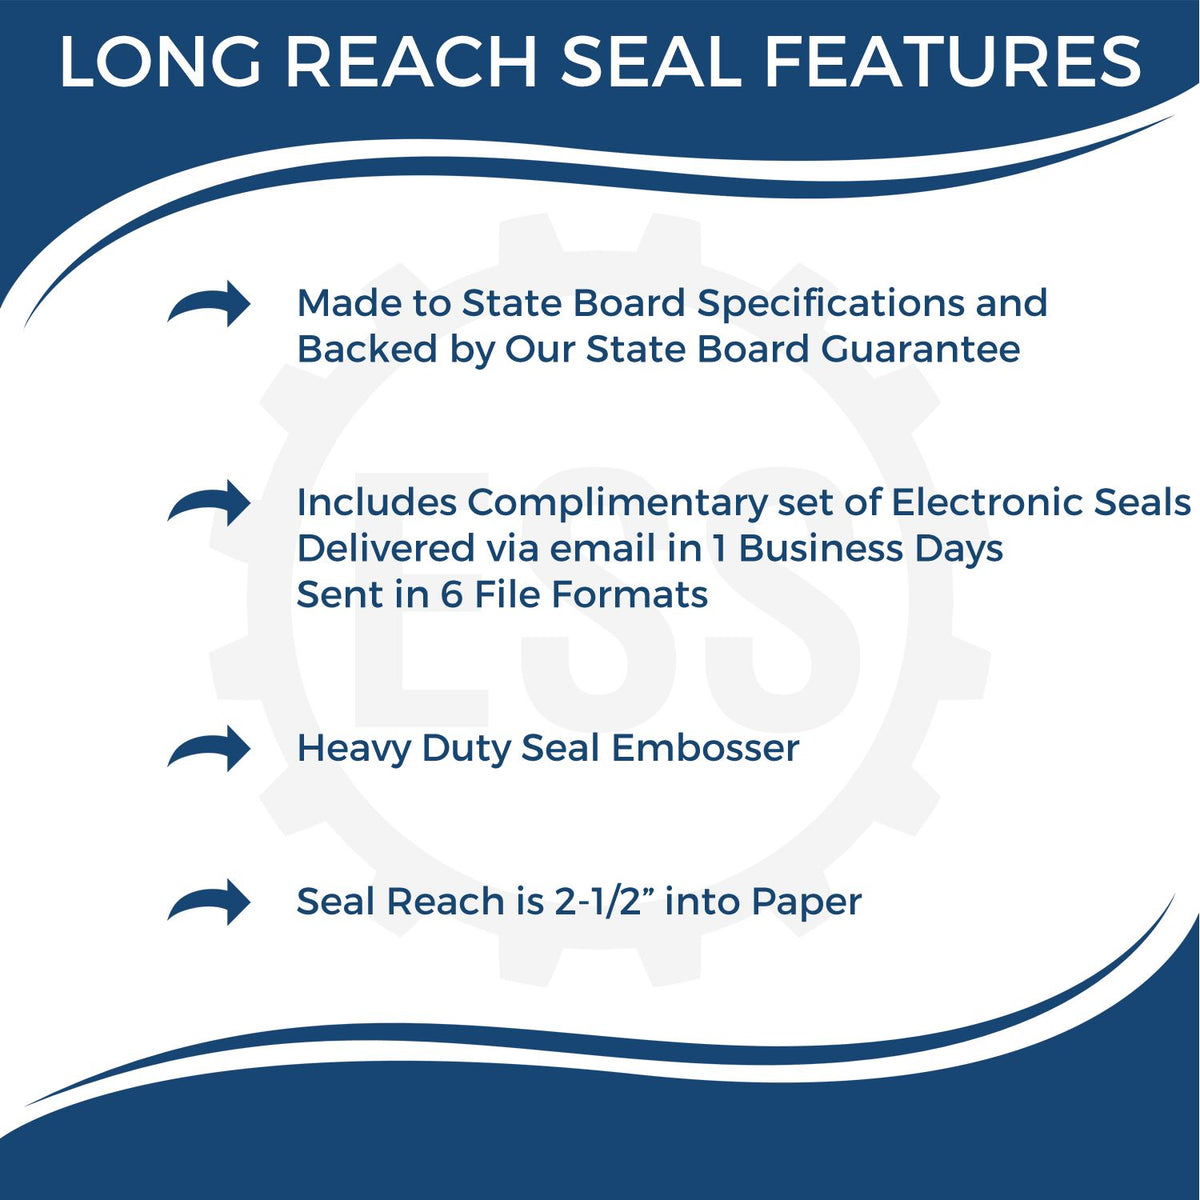 A picture of an infographic highlighting the selling points for the Long Reach Alaska Geology Seal